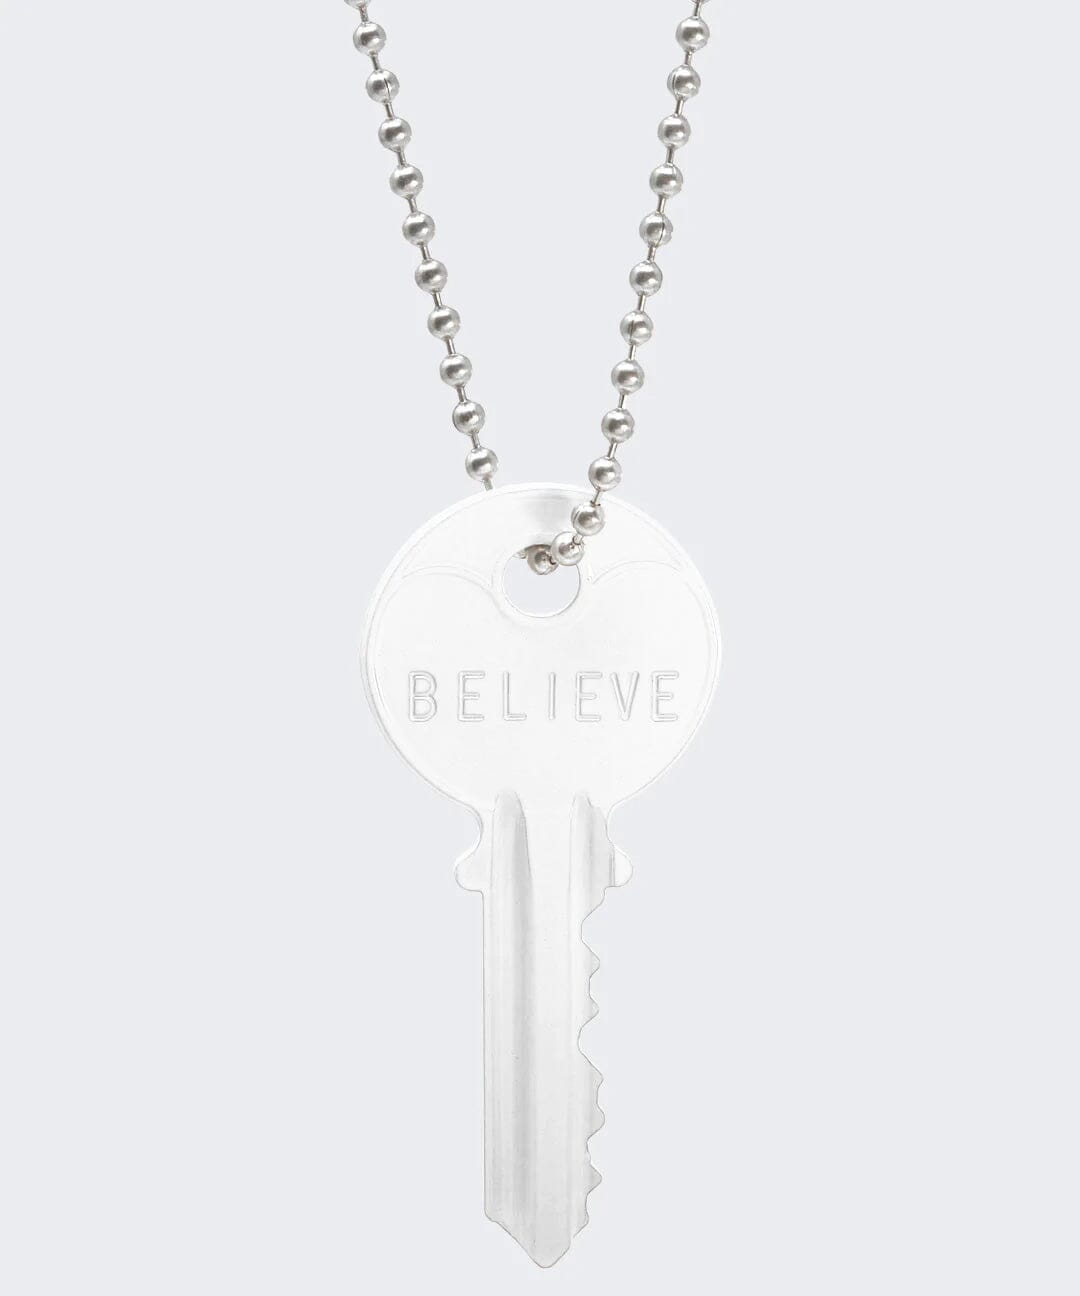 N - Ultra White Classic Ball Chain Key Necklace Necklaces The Giving Keys SILVER 